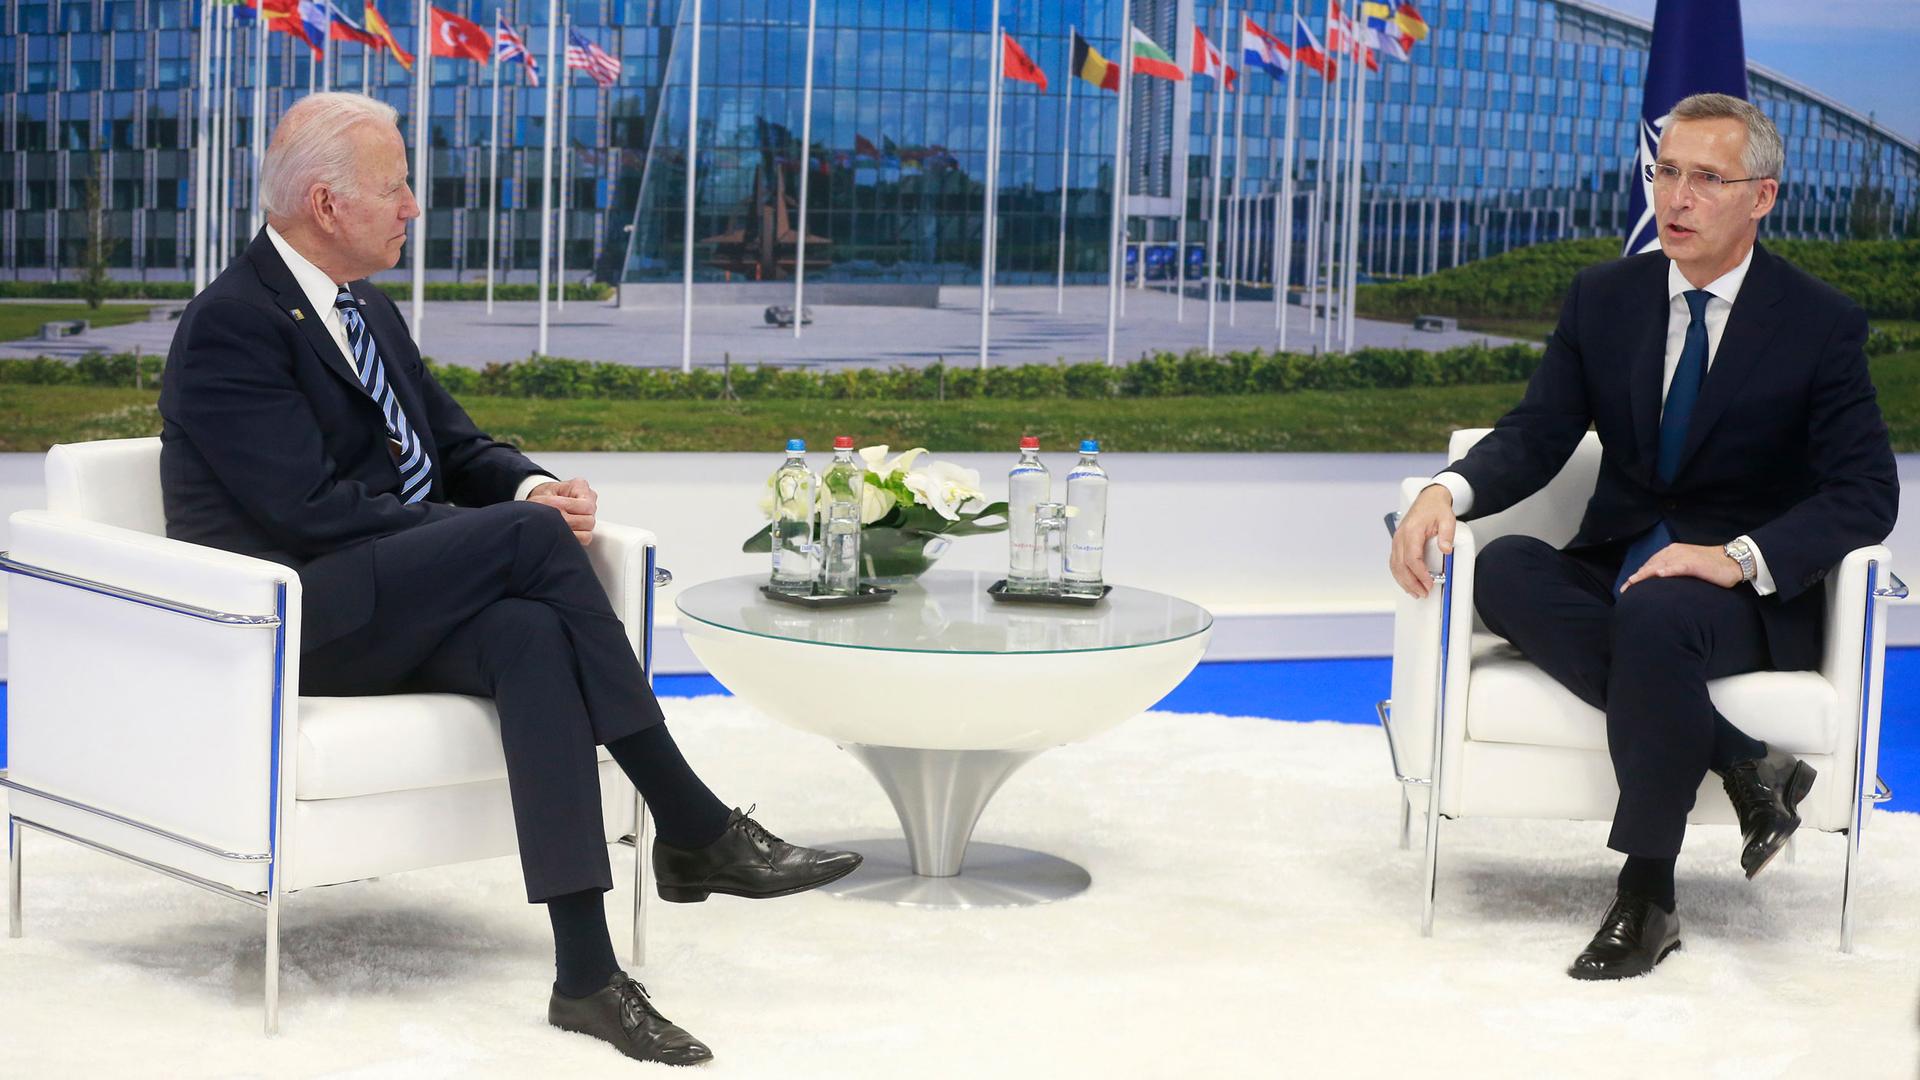 NATO Secretary General Jens Stoltenberg and US President Joe Biden are shown both wearing suits and sitting in white armchairs.